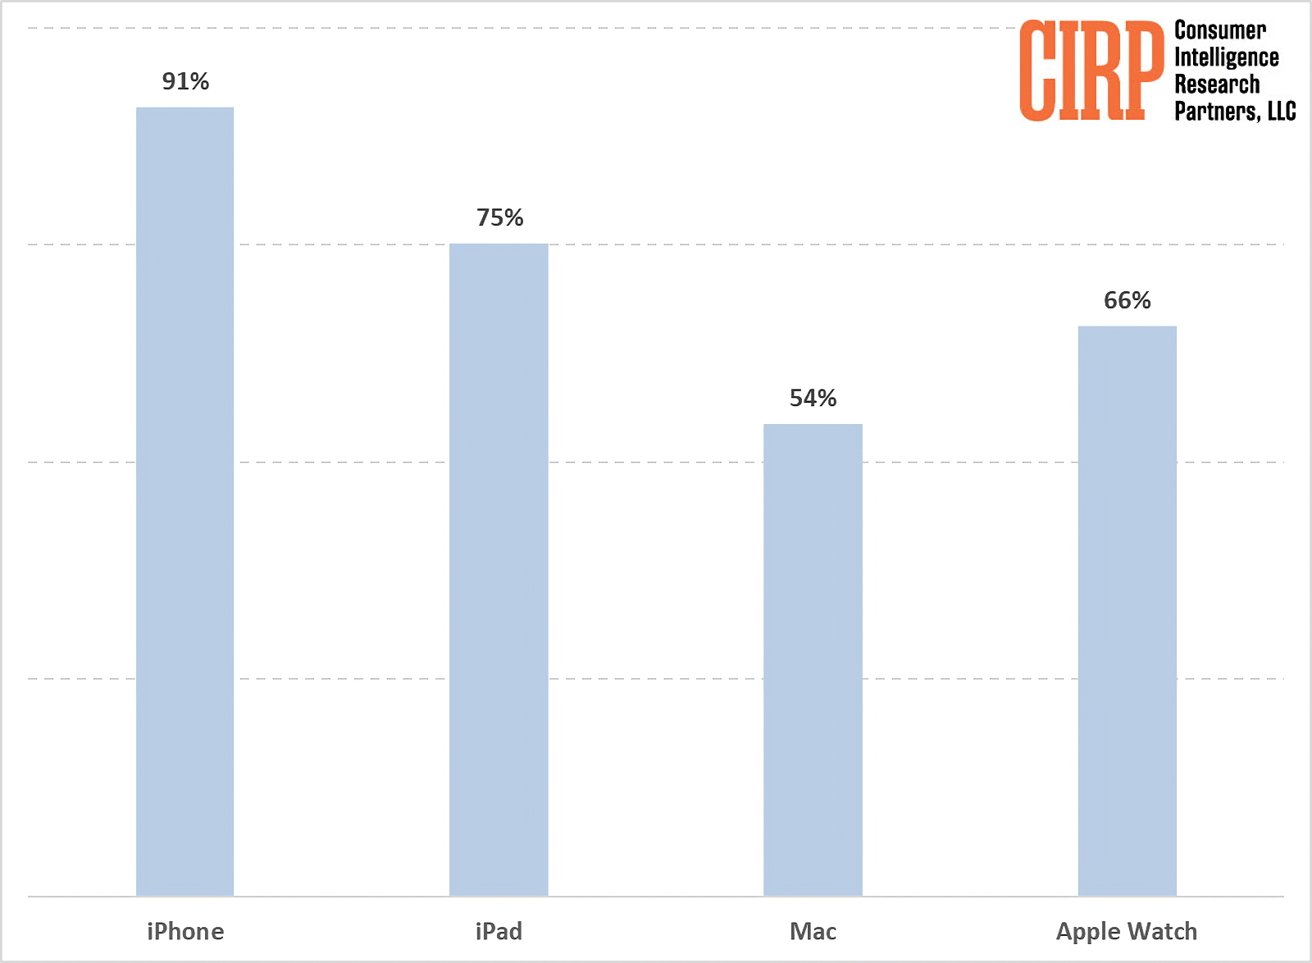 A bar chart showing percentage satisfaction rates for iPhone, iPad, Mac, and Apple Watch products.